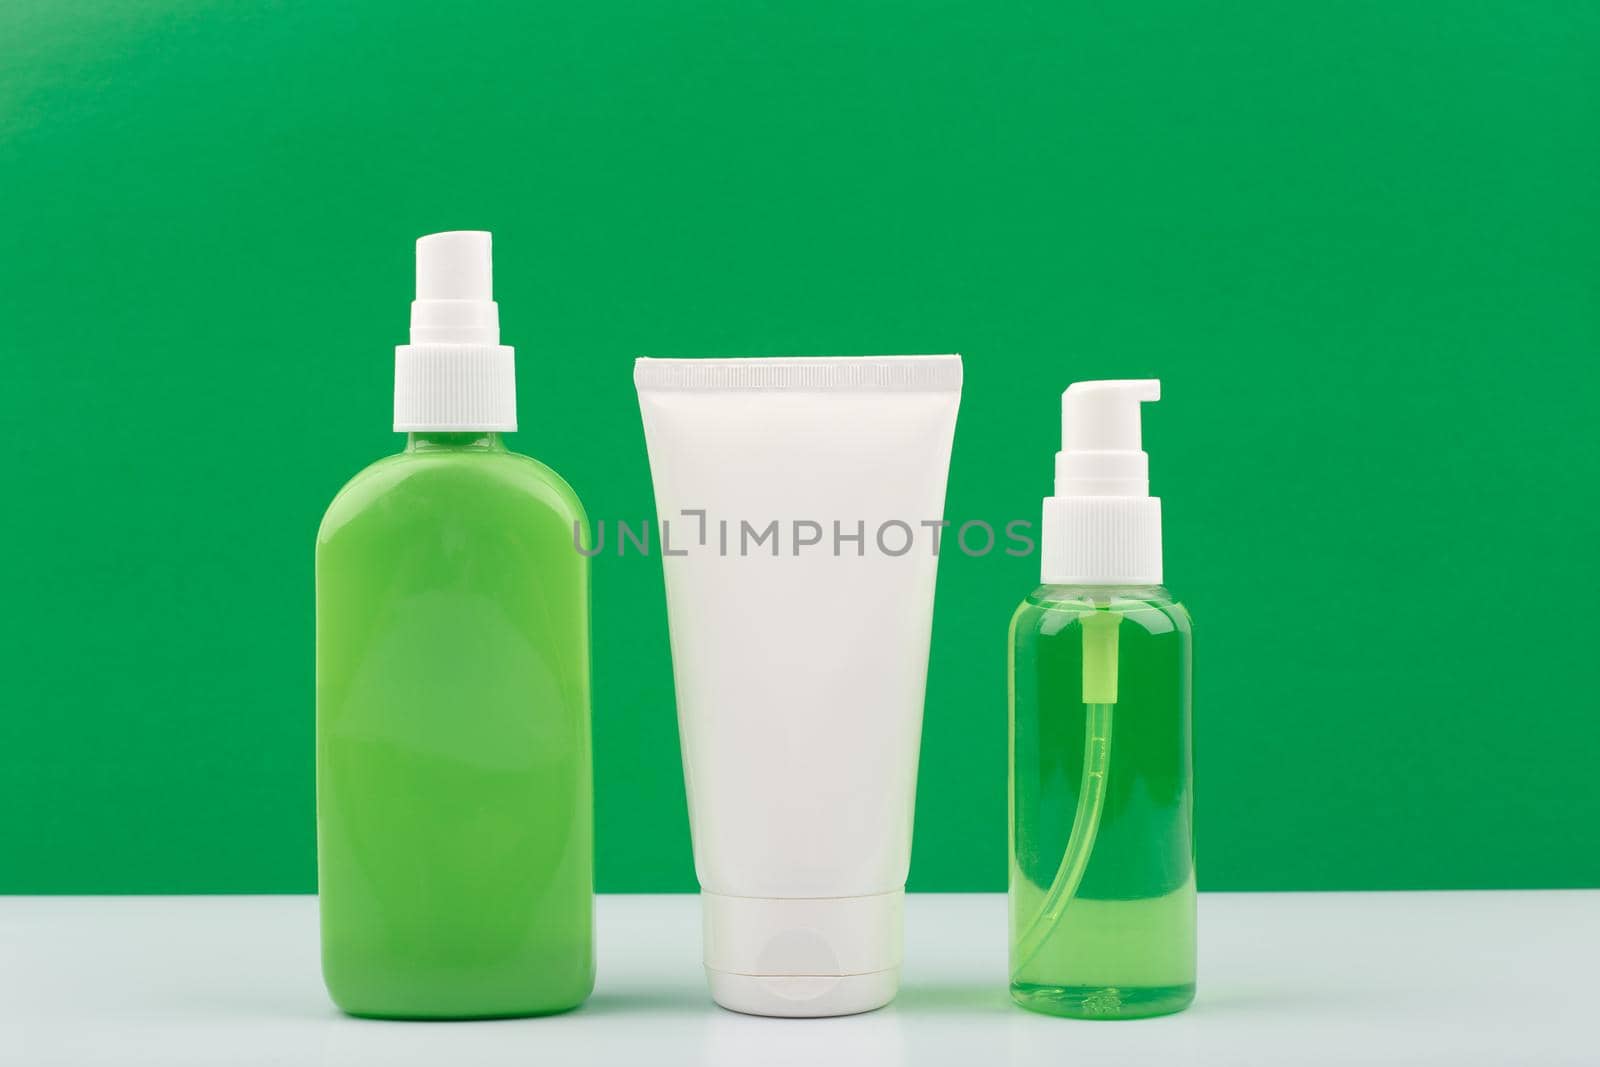 Set of green and white cosmetic bottles against yellow background. Concept of organic beauty products with natural ingredients. Moisturizing body spray, face cream and cleansing gel for face.